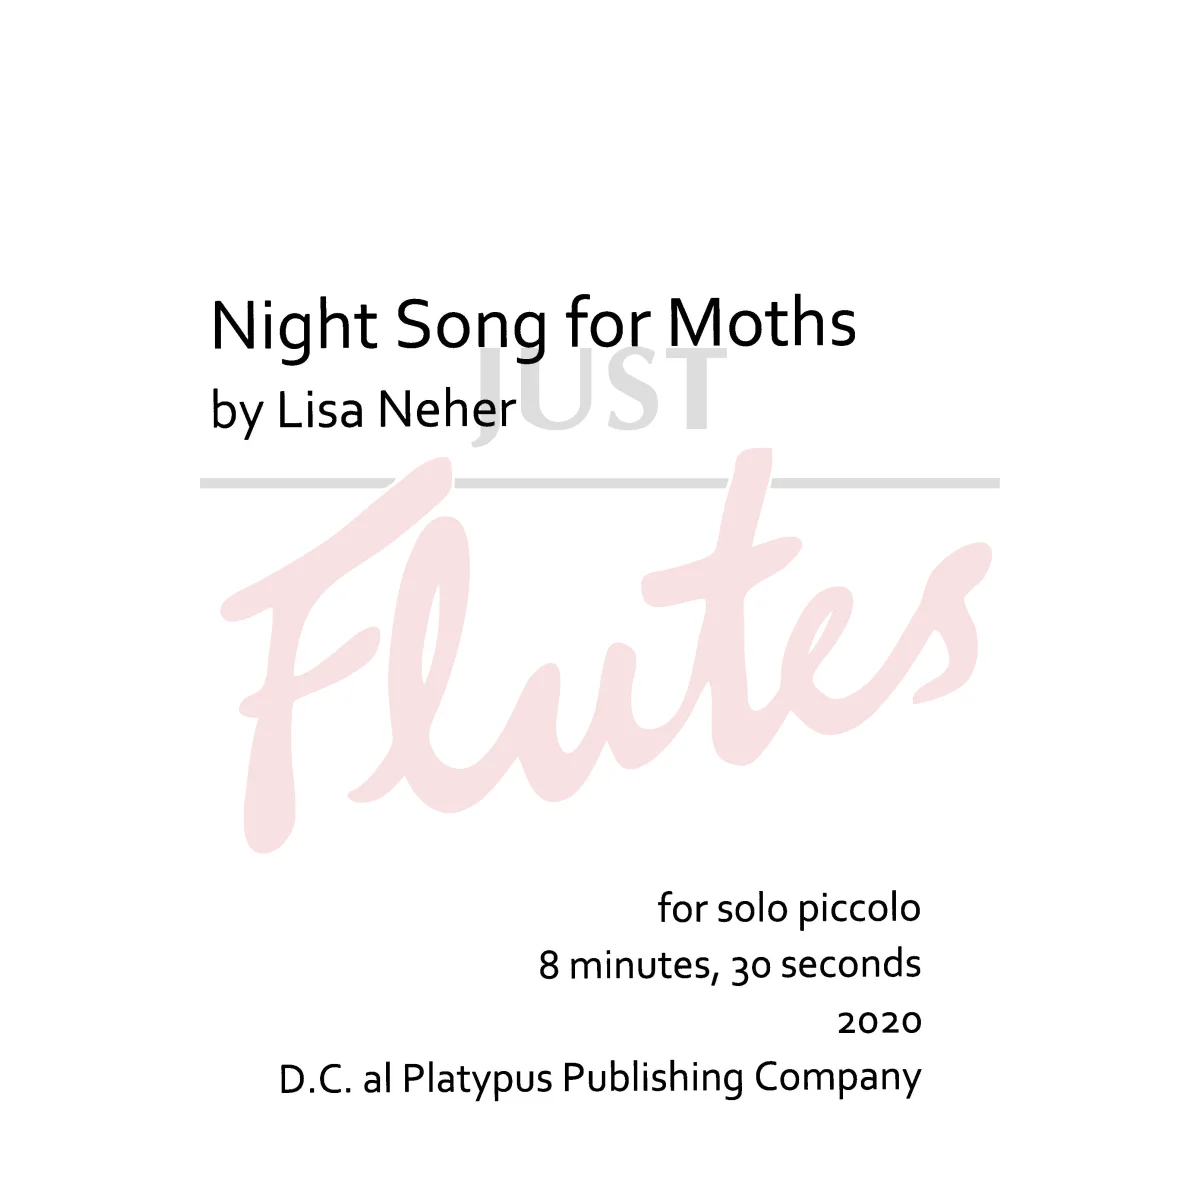 Night Song for Moths for Solo Piccolo